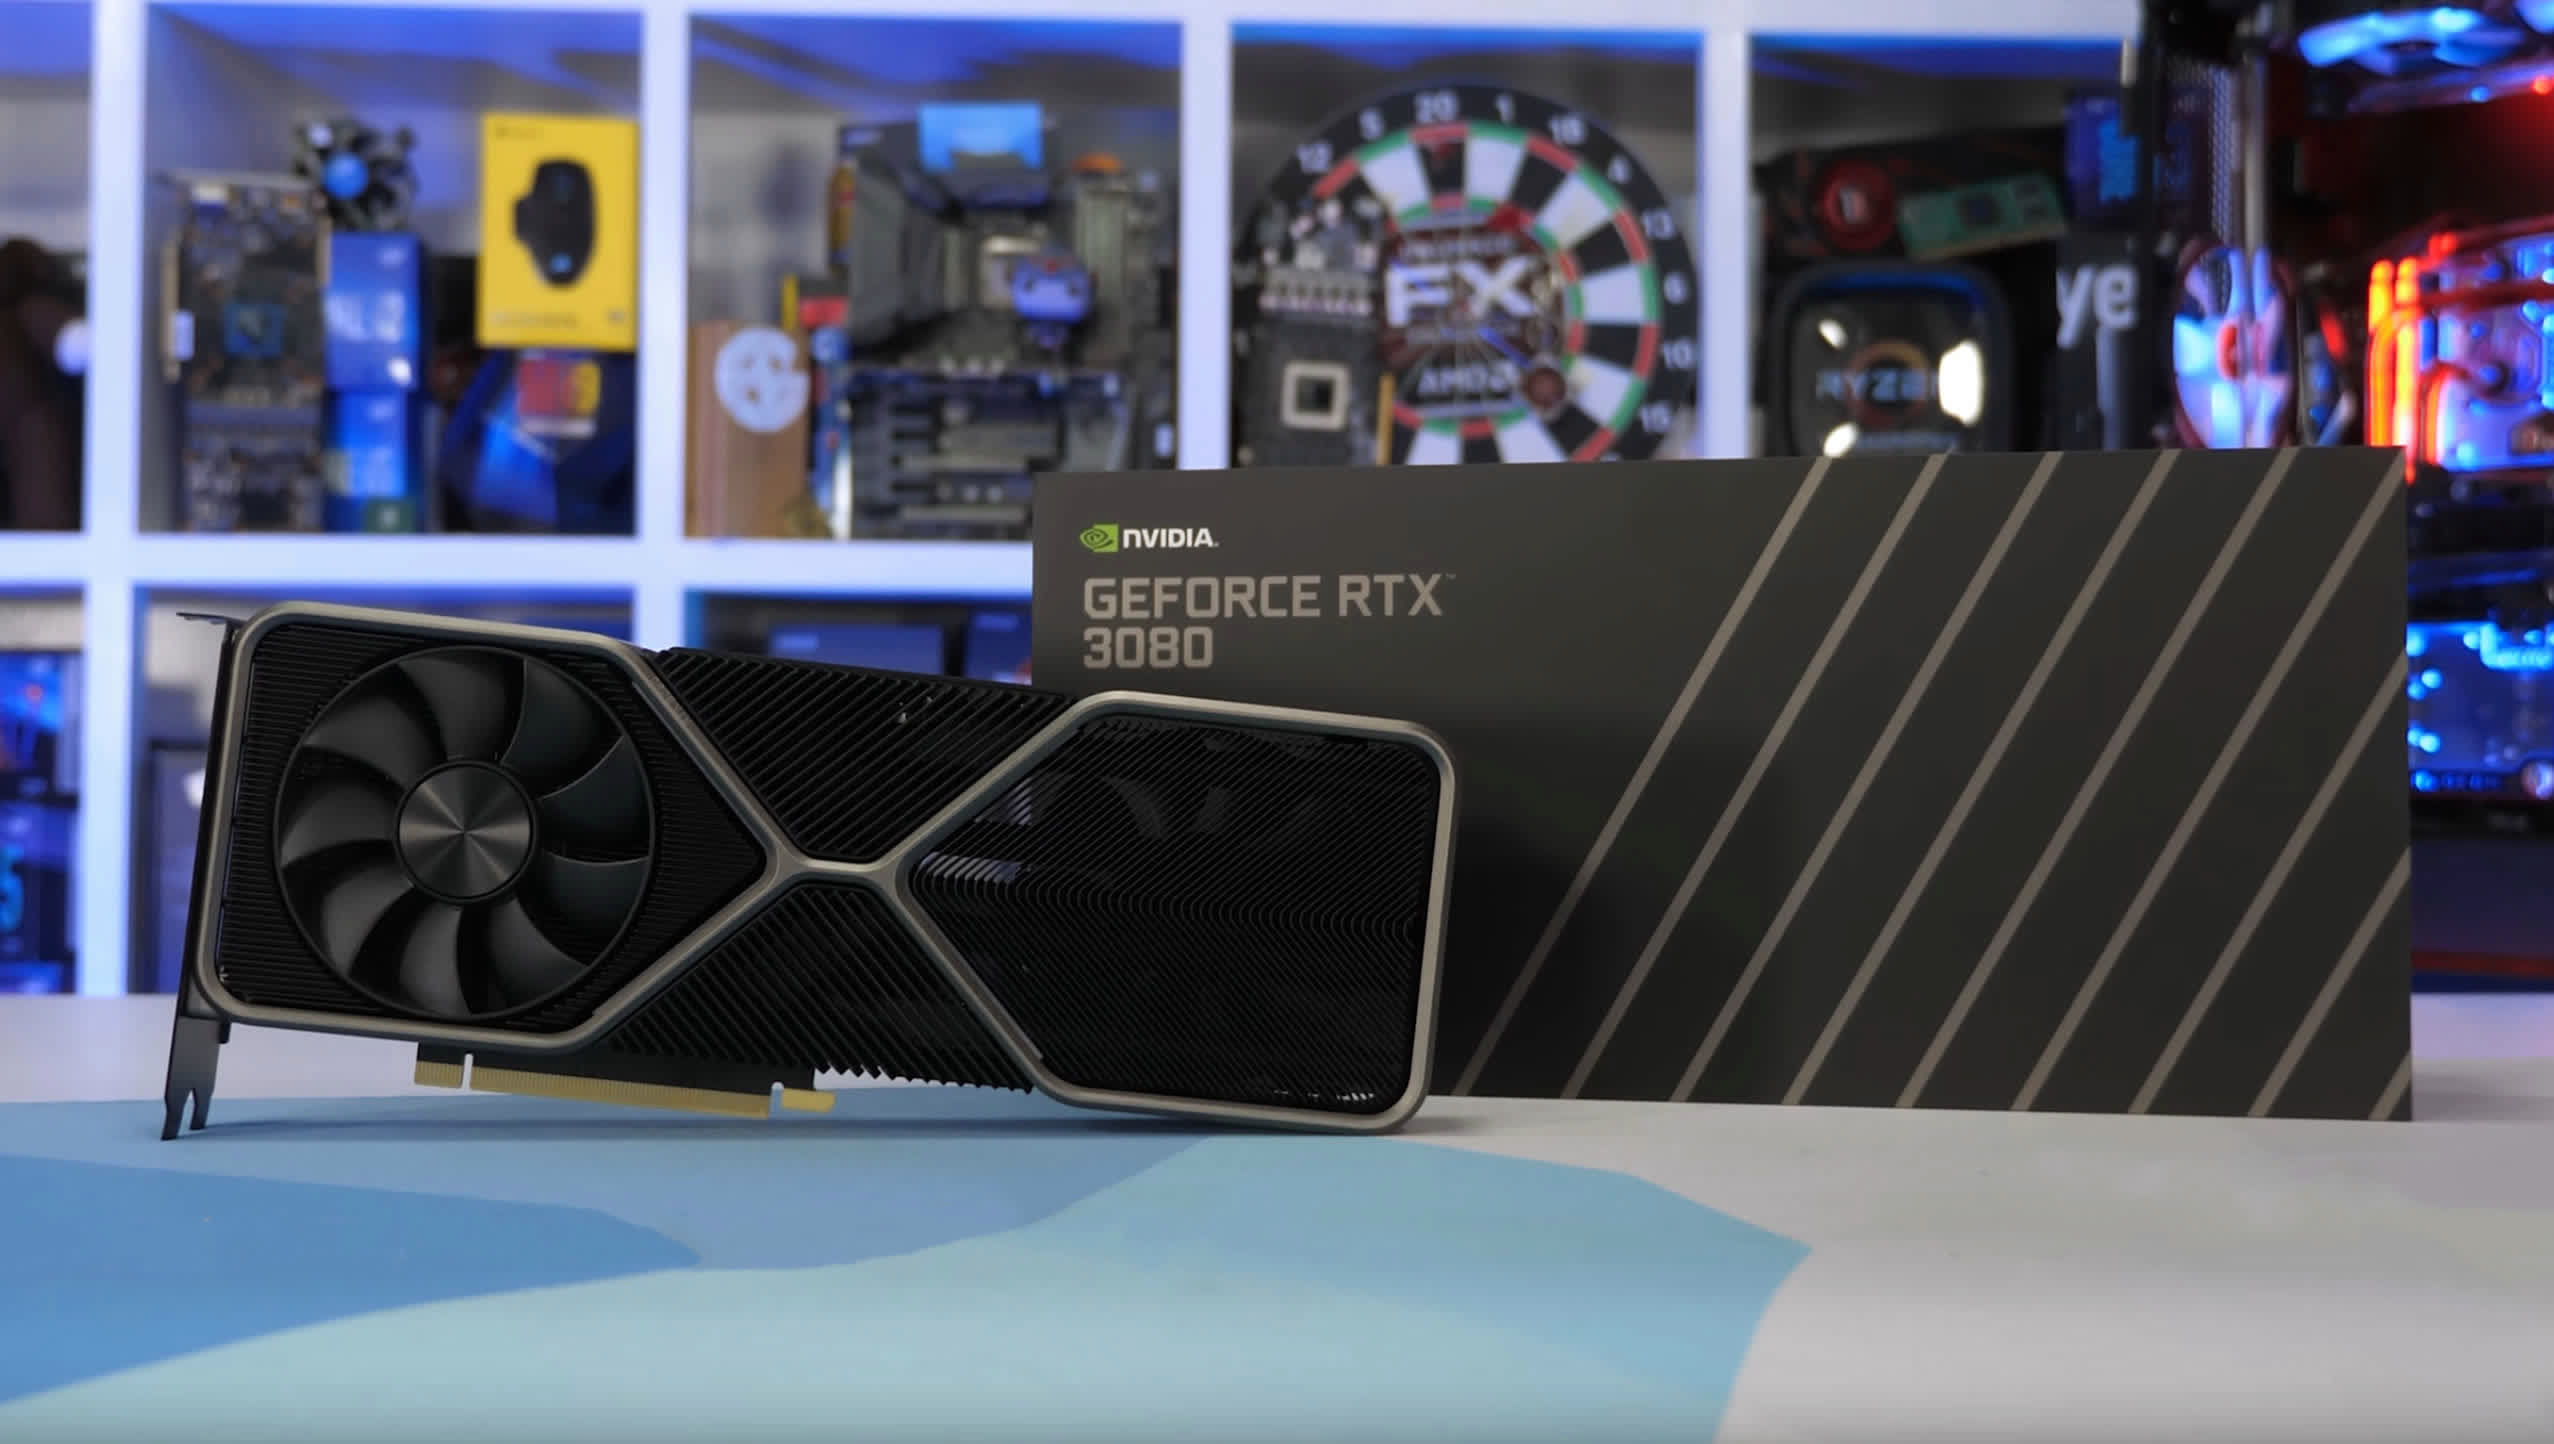 Will Nvidia announce the RTX 3070 Ti/3080 Ti at Computex? It looks likely